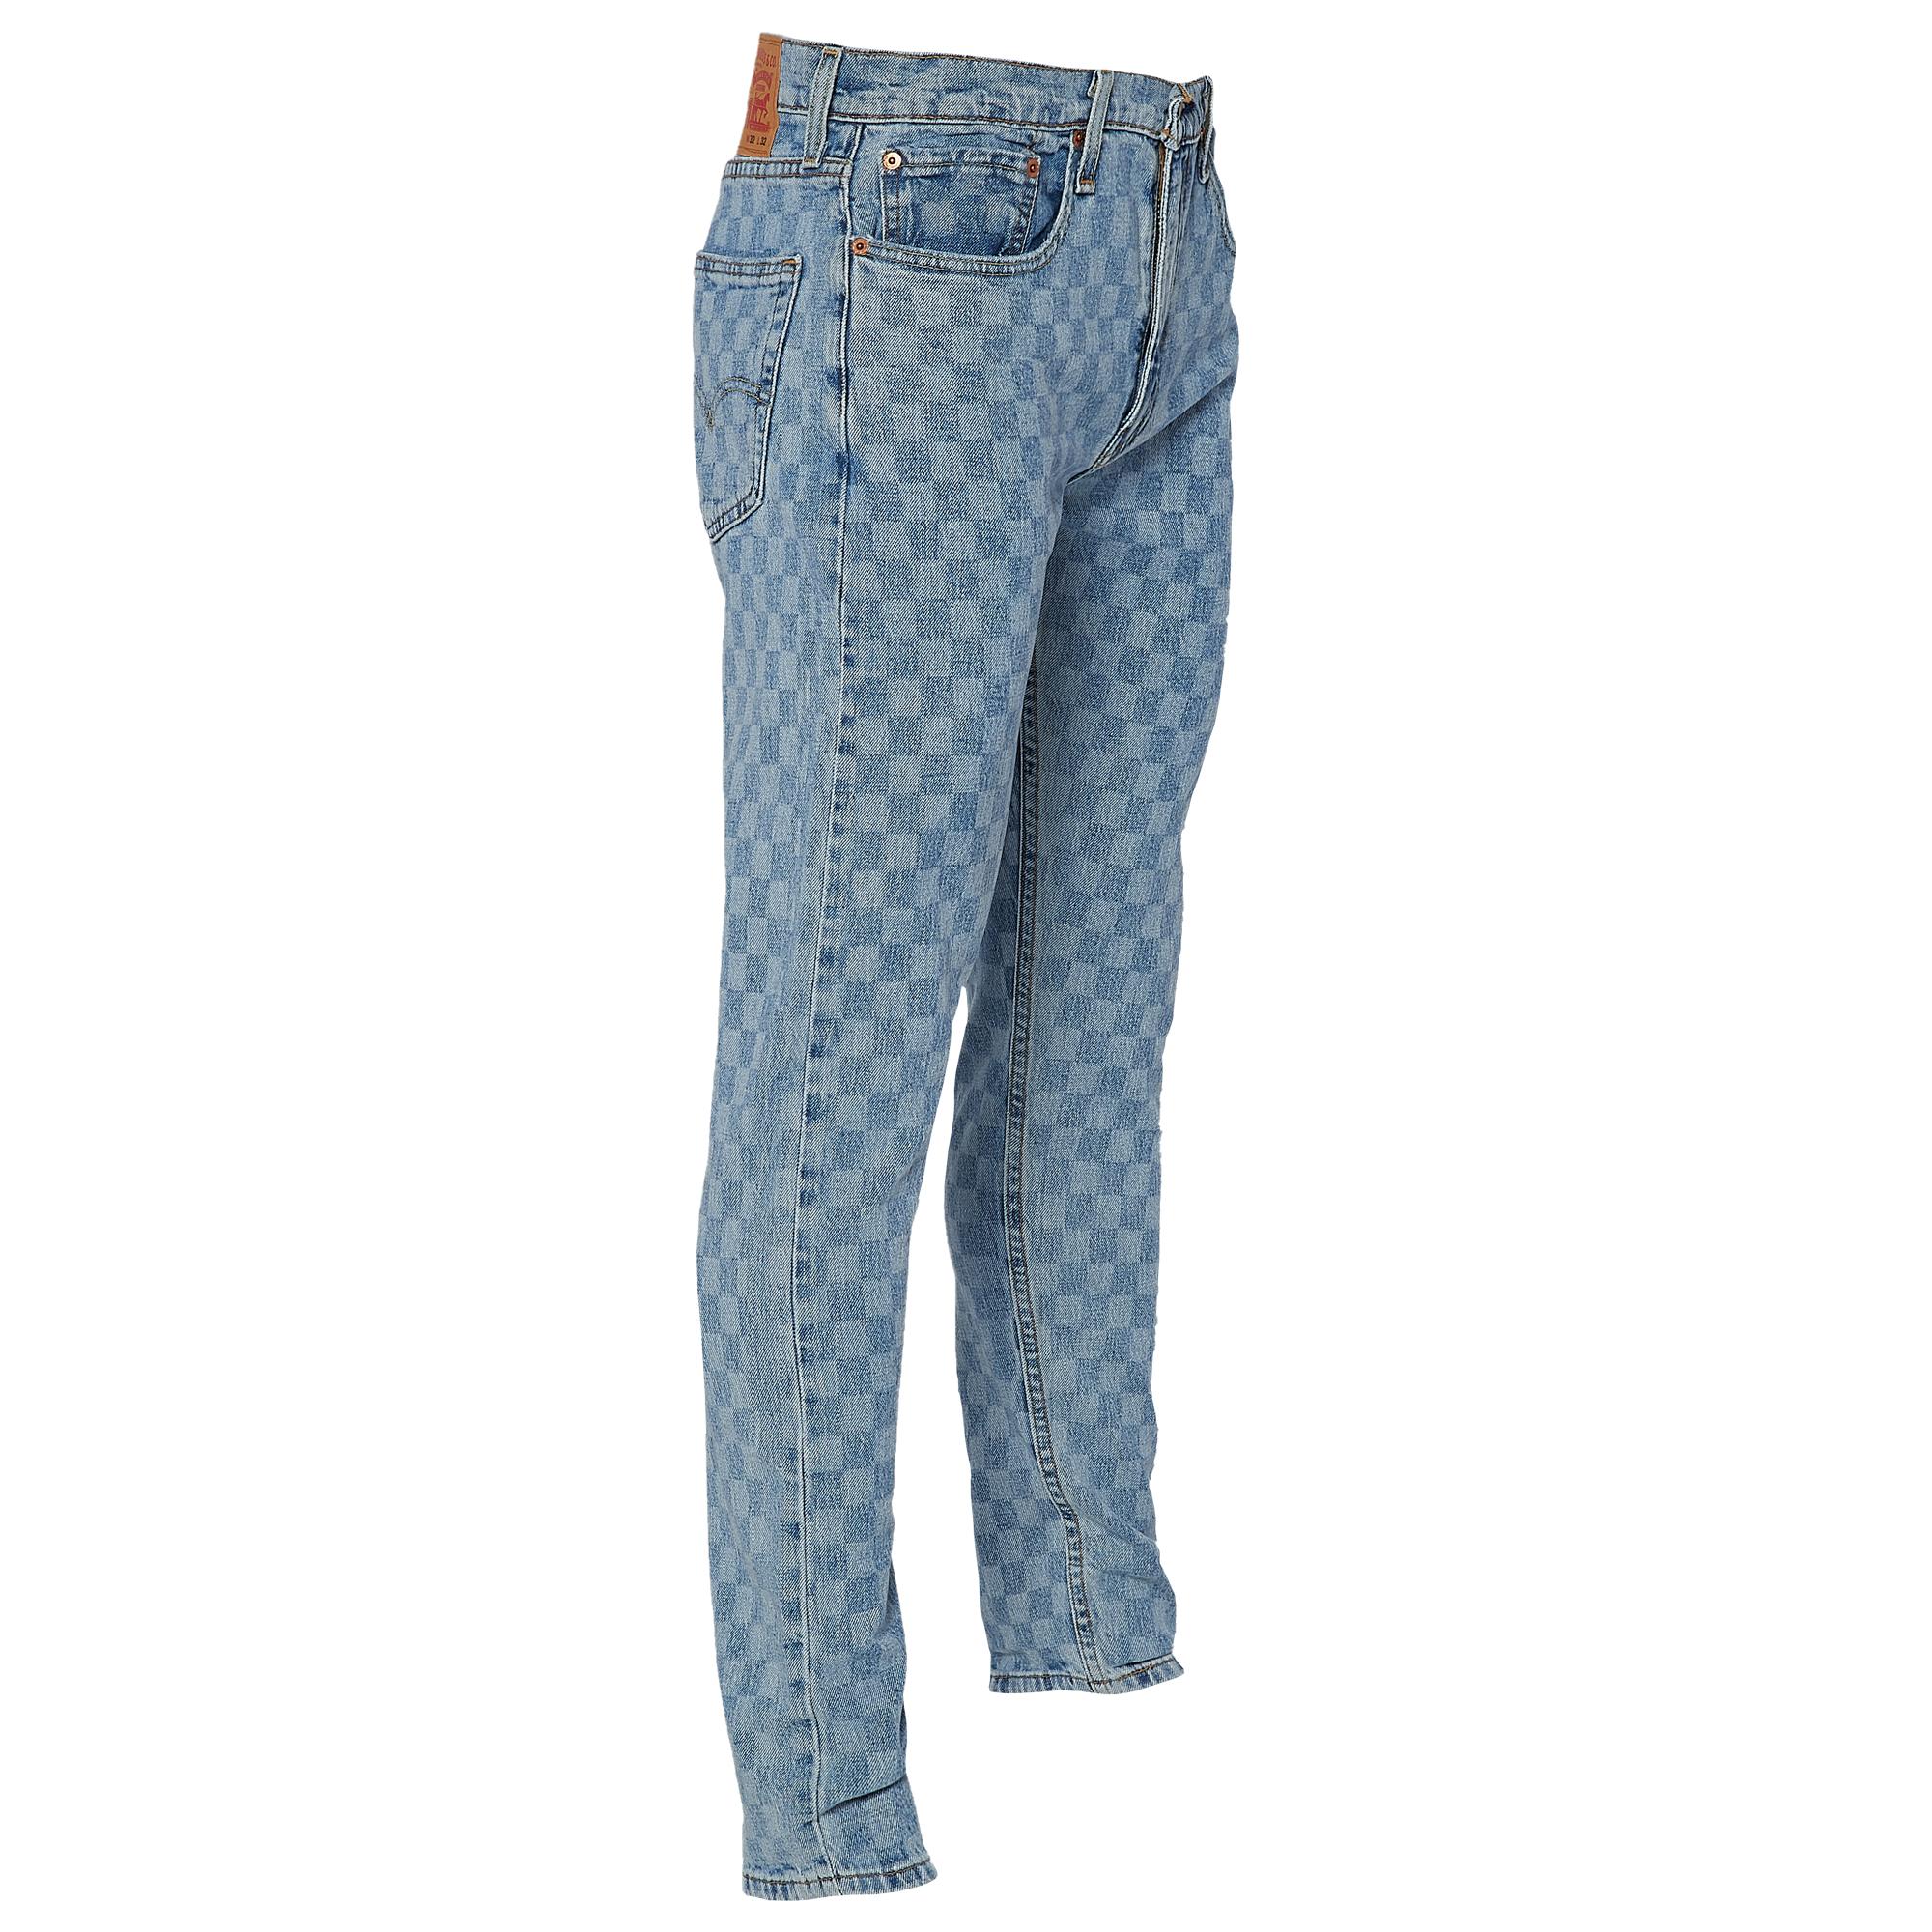 Levis Checkered Jeans Luxembourg, SAVE 58% 